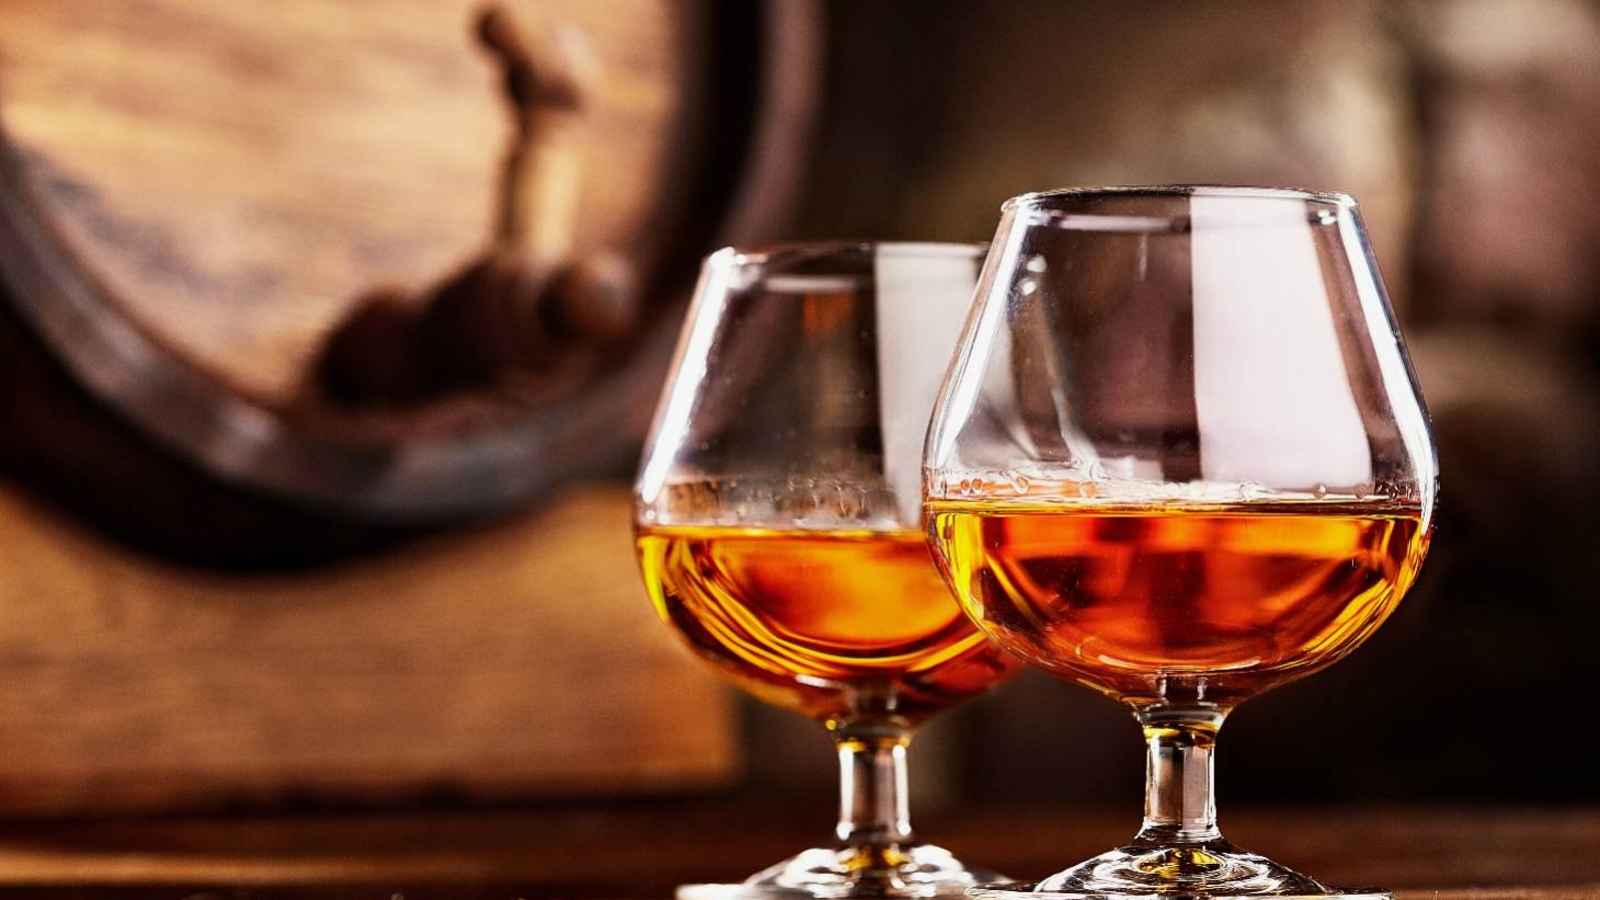 National Cognac Day 2023: Date, History, Facts about Ugni Blanc